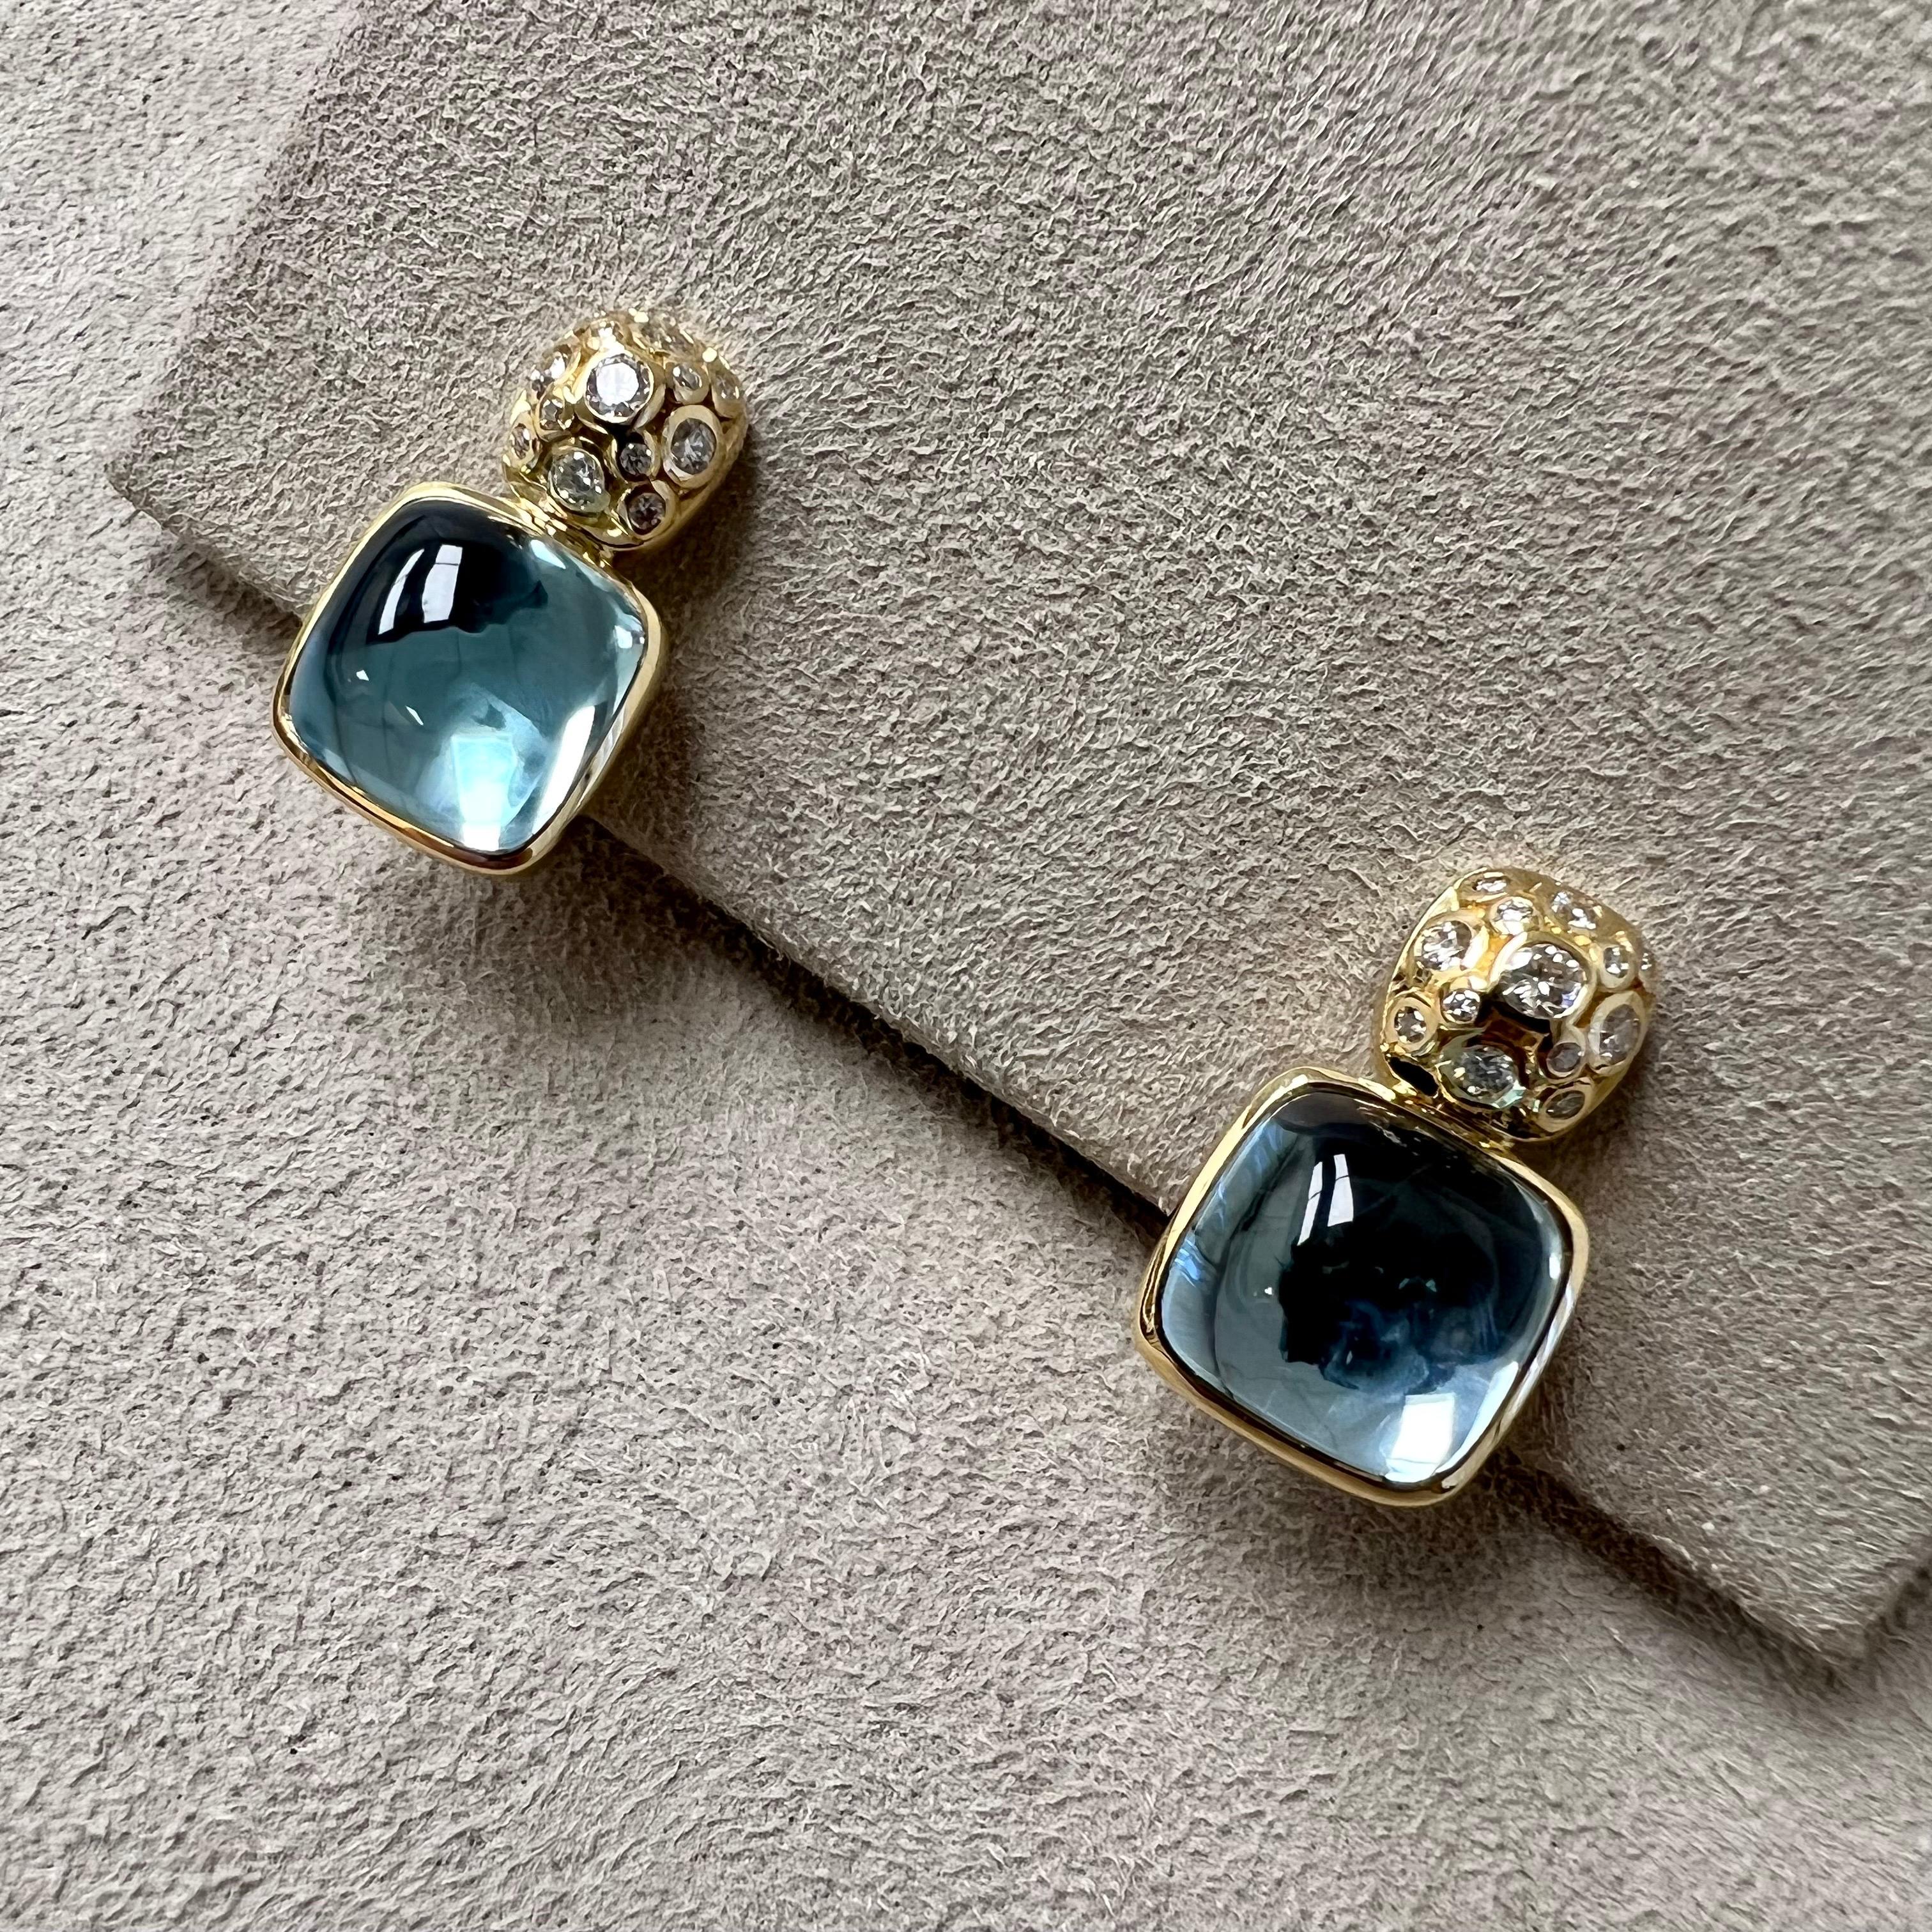 Created in 18kyg
Blue Topaz 15 carats approx.
Diamonds 0.30 carat approx.
Omega clip backs
Limited edition

Crafted from 18-karat yellow gold, these exquisite earrings boast a shimmering 15-carat blue topaz and dazzling 0.30-carat diamonds. Adorned